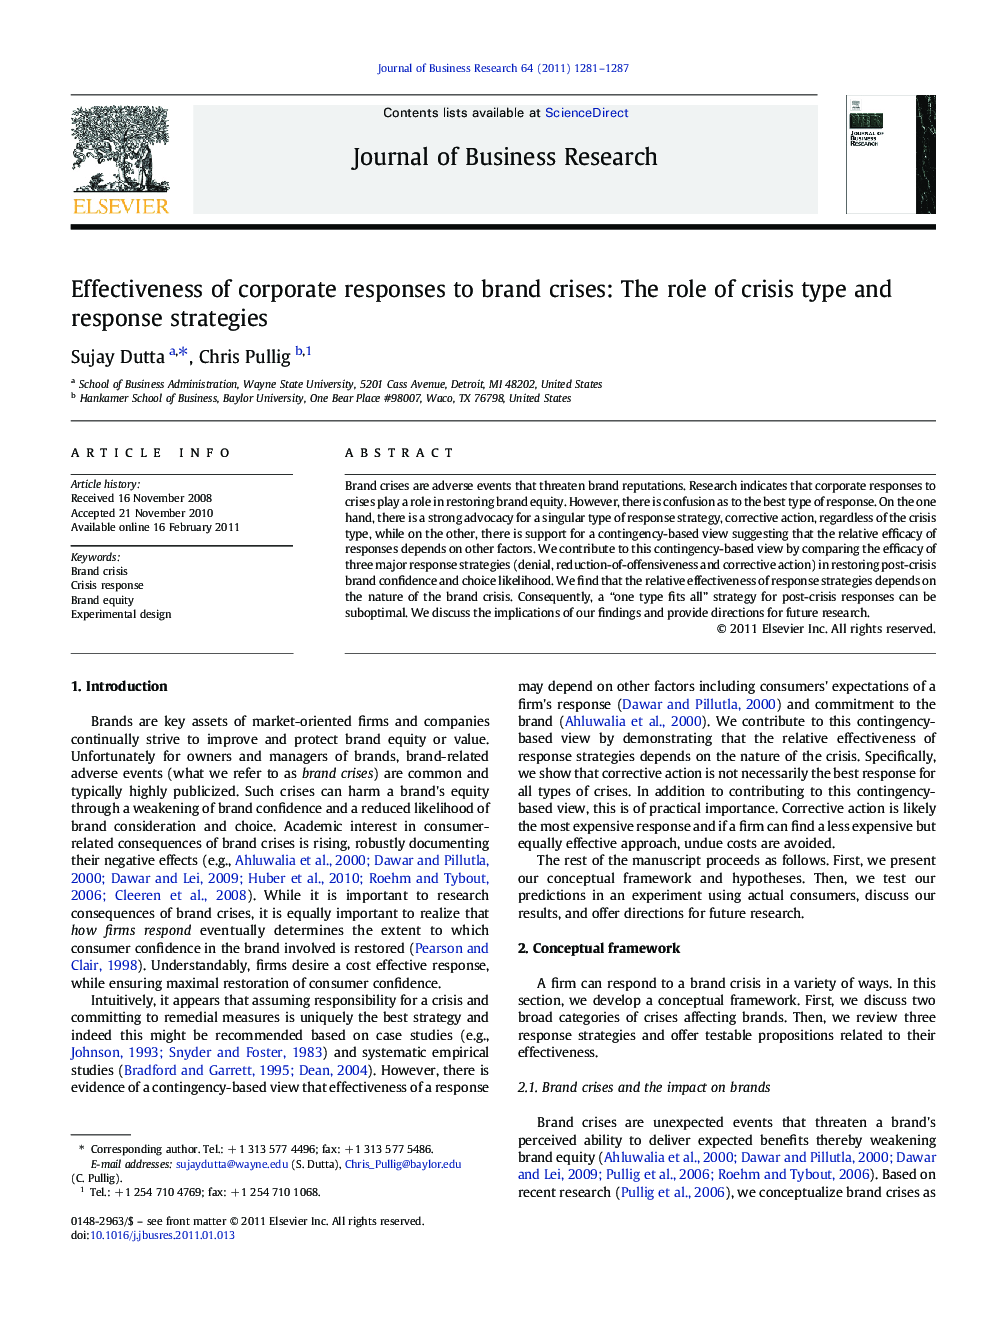 Effectiveness of corporate responses to brand crises: The role of crisis type and response strategies